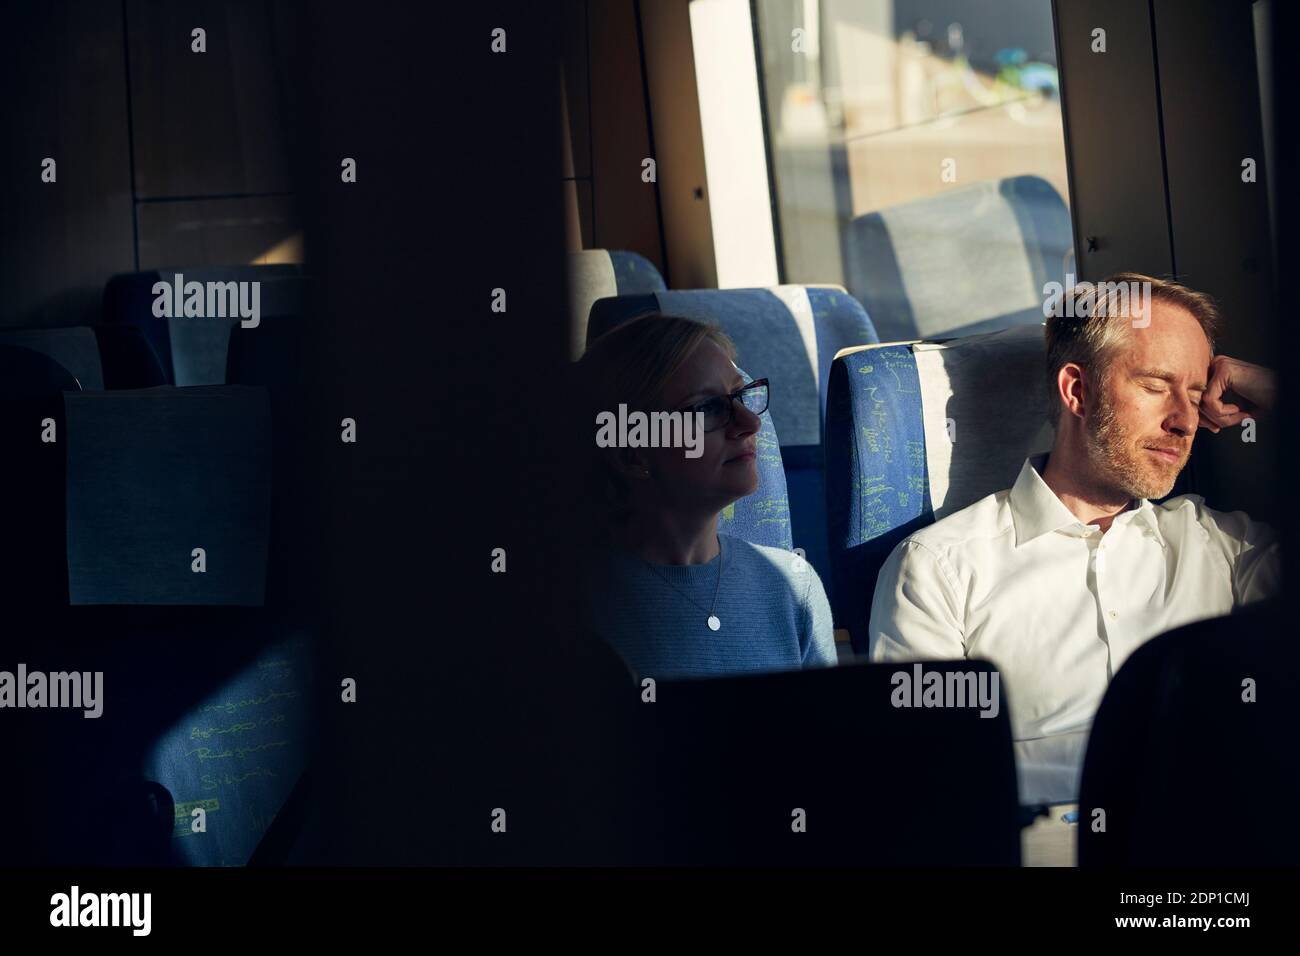 Man sitting in train with eyes closed Stockfoto